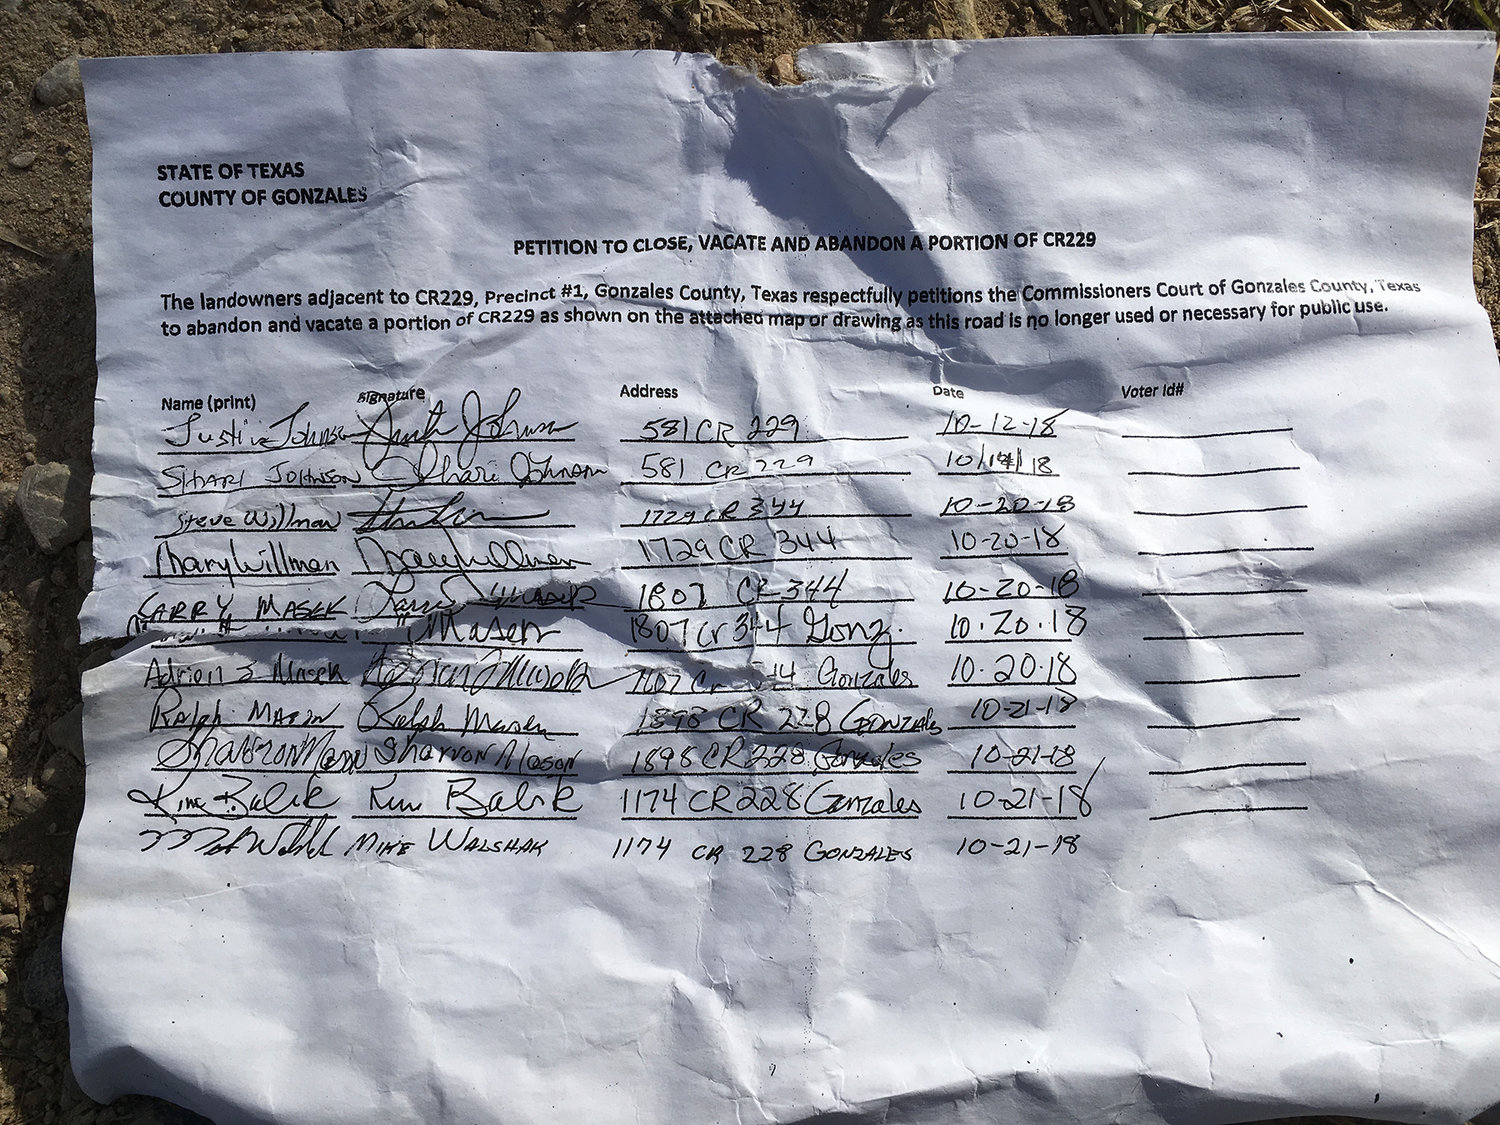 The petition that was submitted for the closure of CR 229 holds 10 signatures.